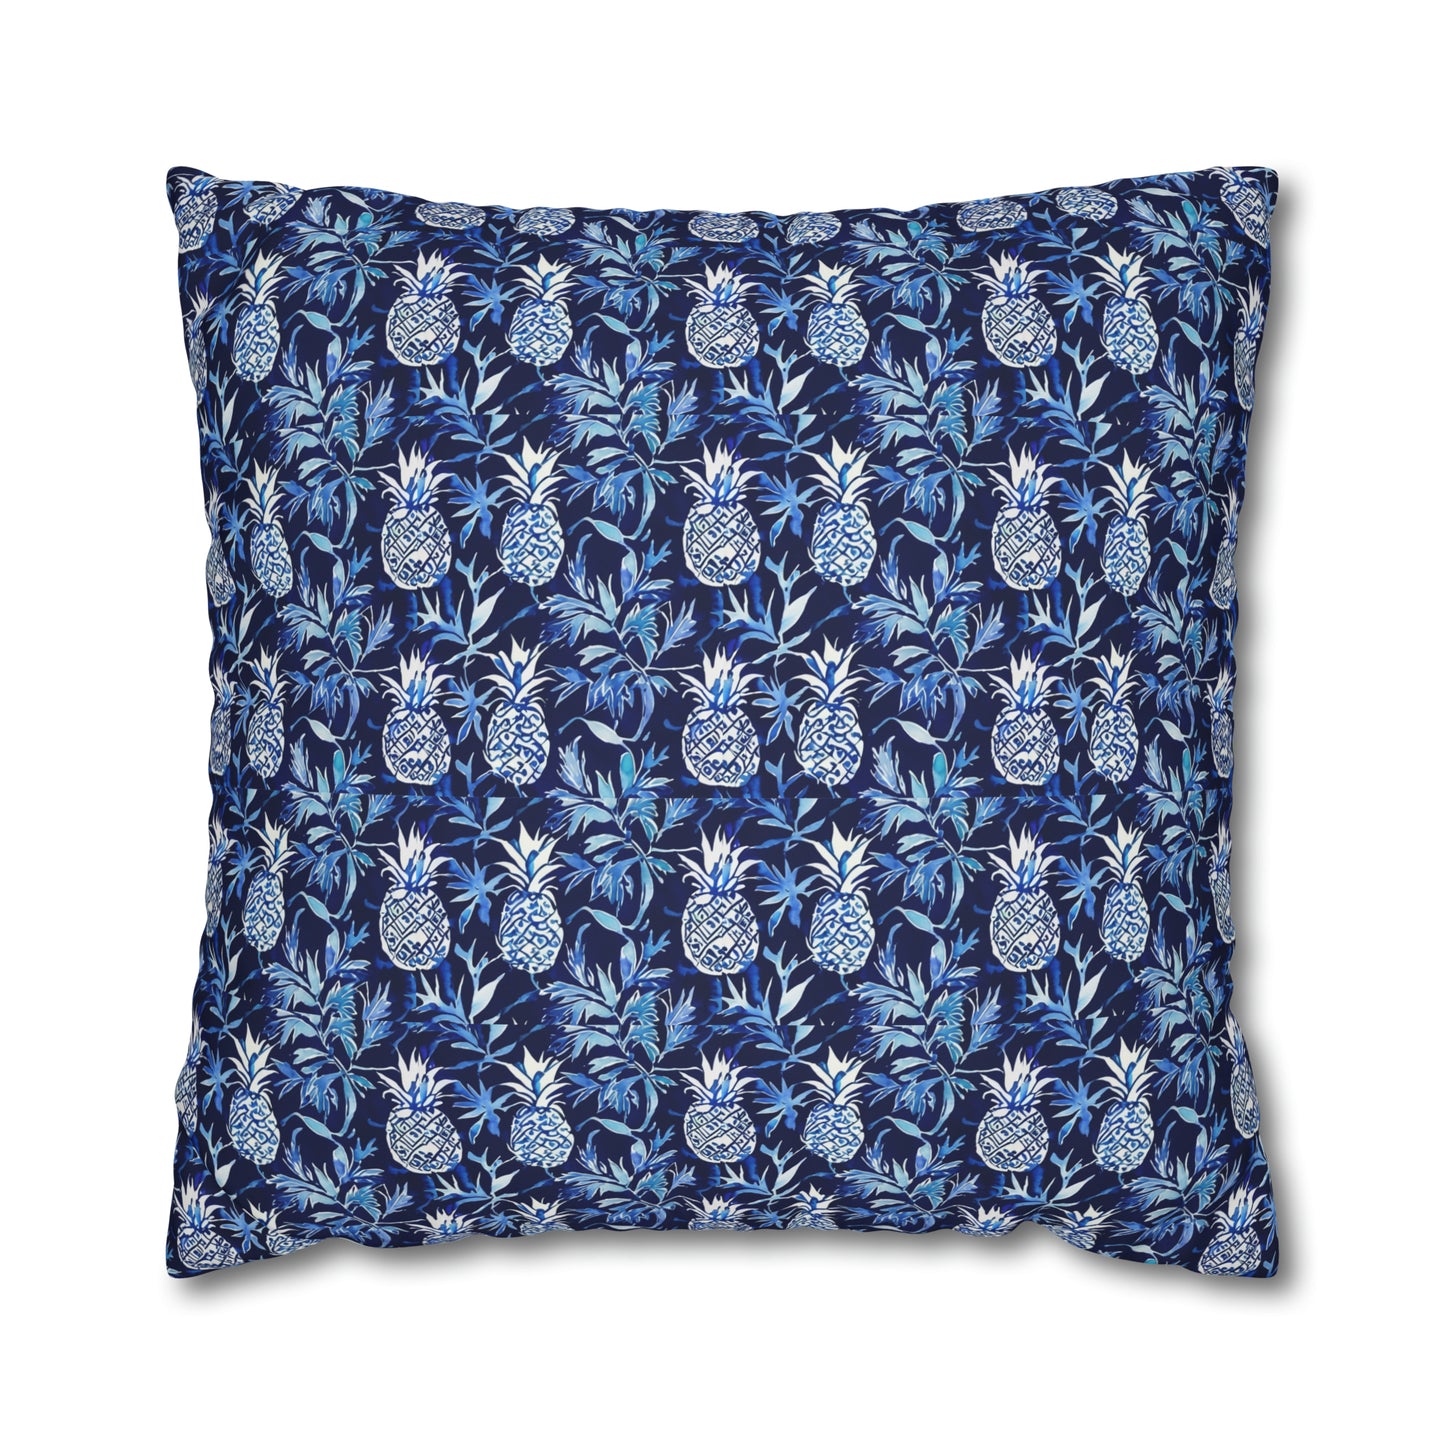 Blue and White Pineapple Batik Decorative Square Poly Canvas Pillow Cover